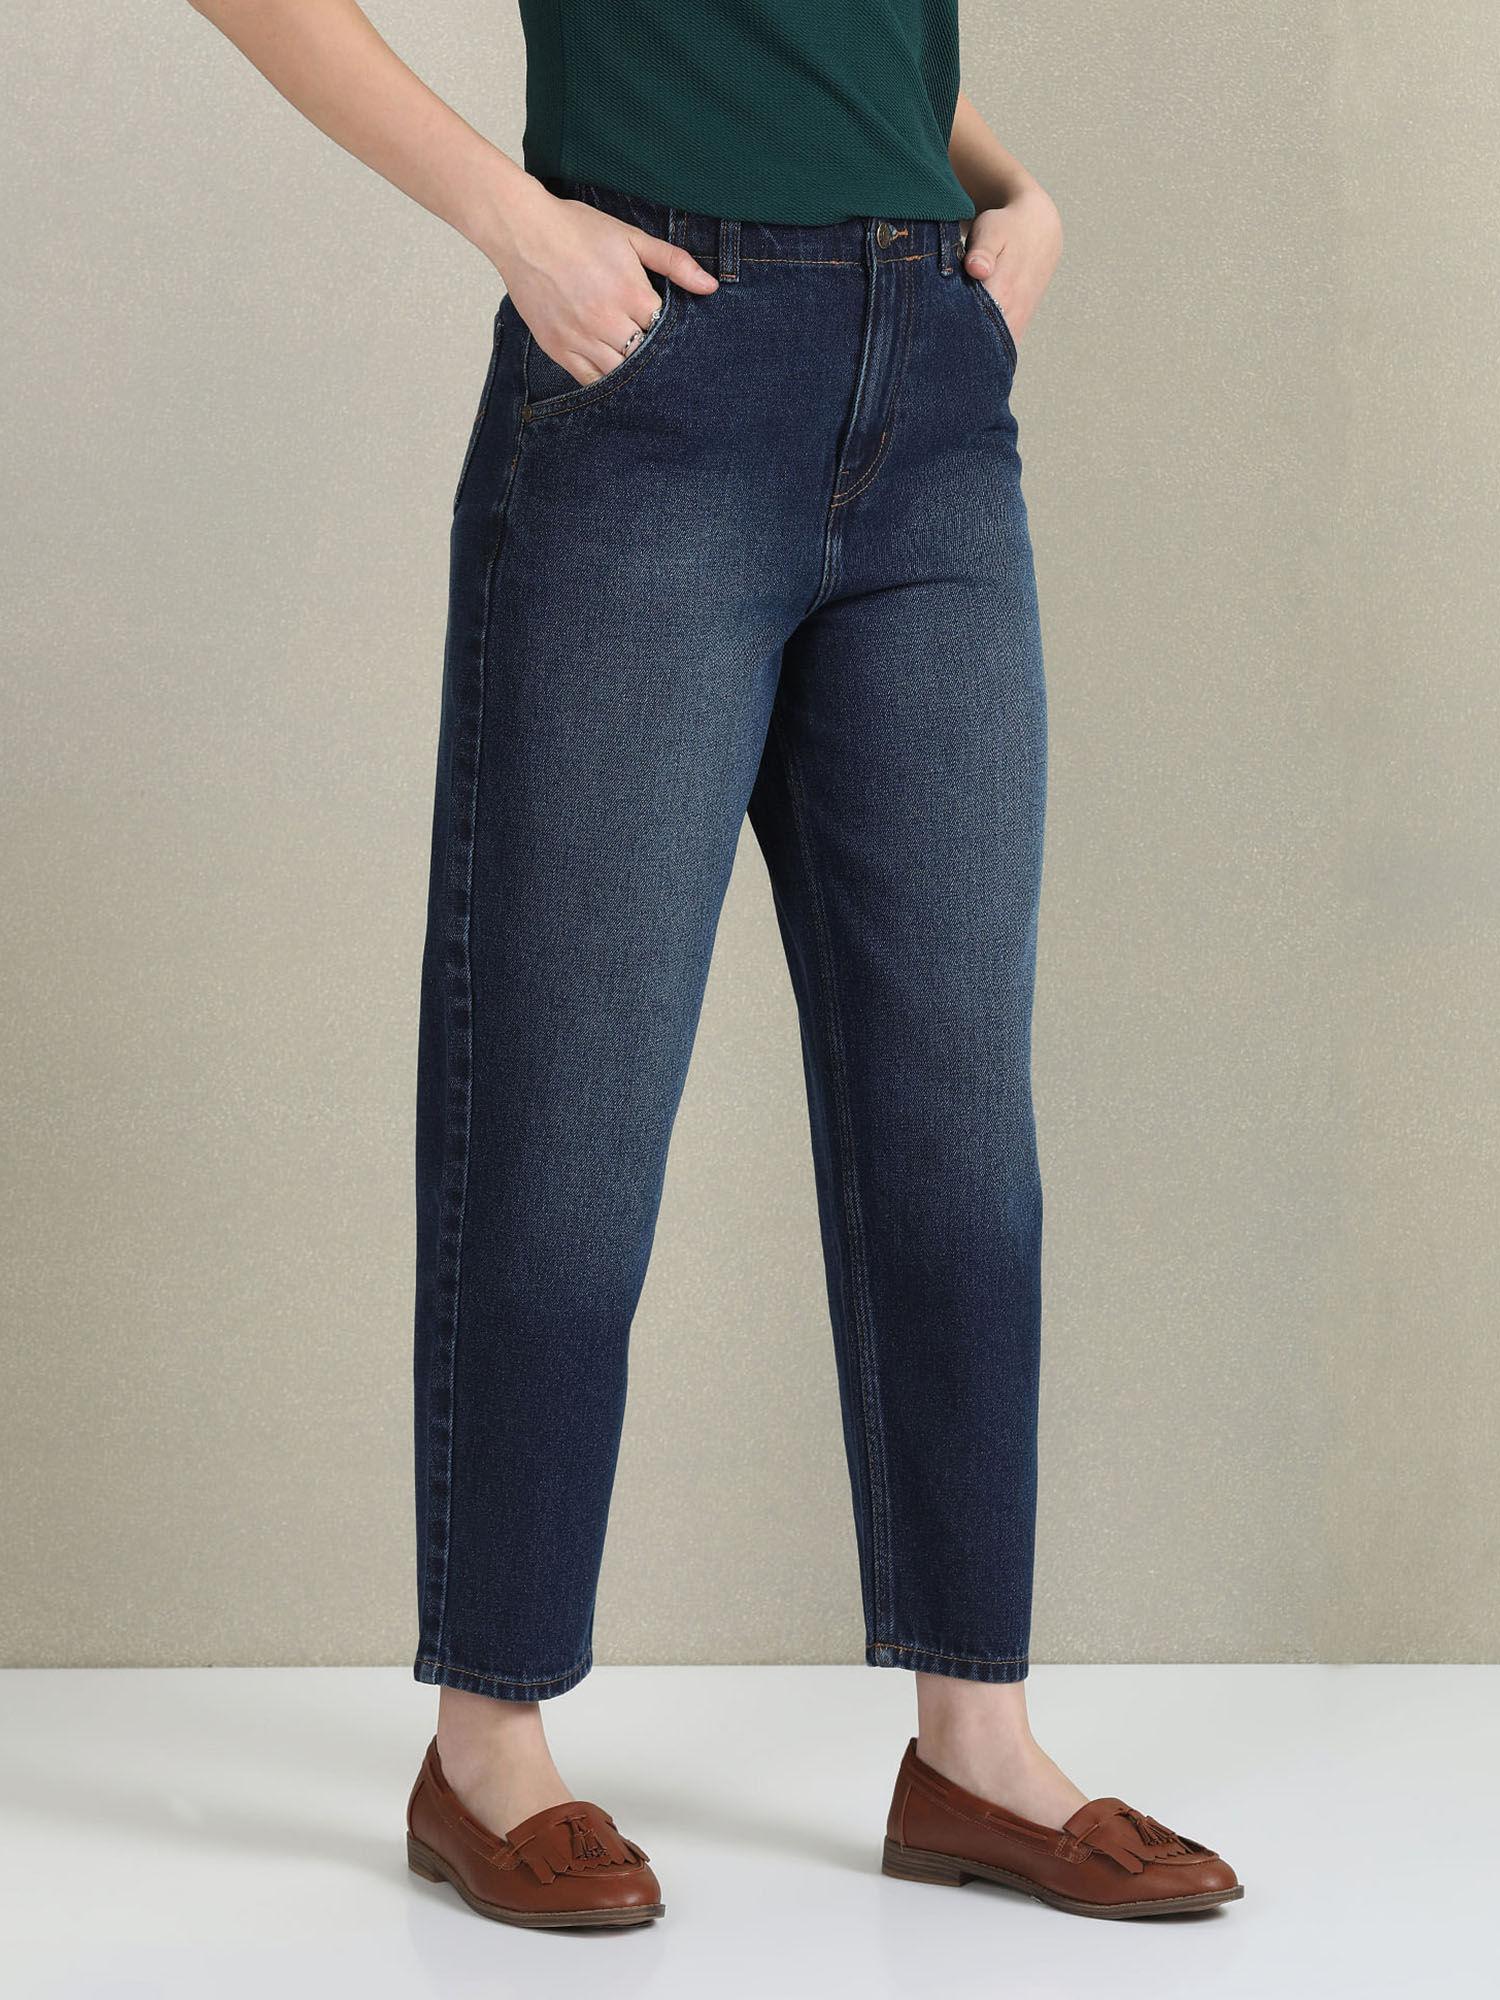 high rise carrot fit blue jeans